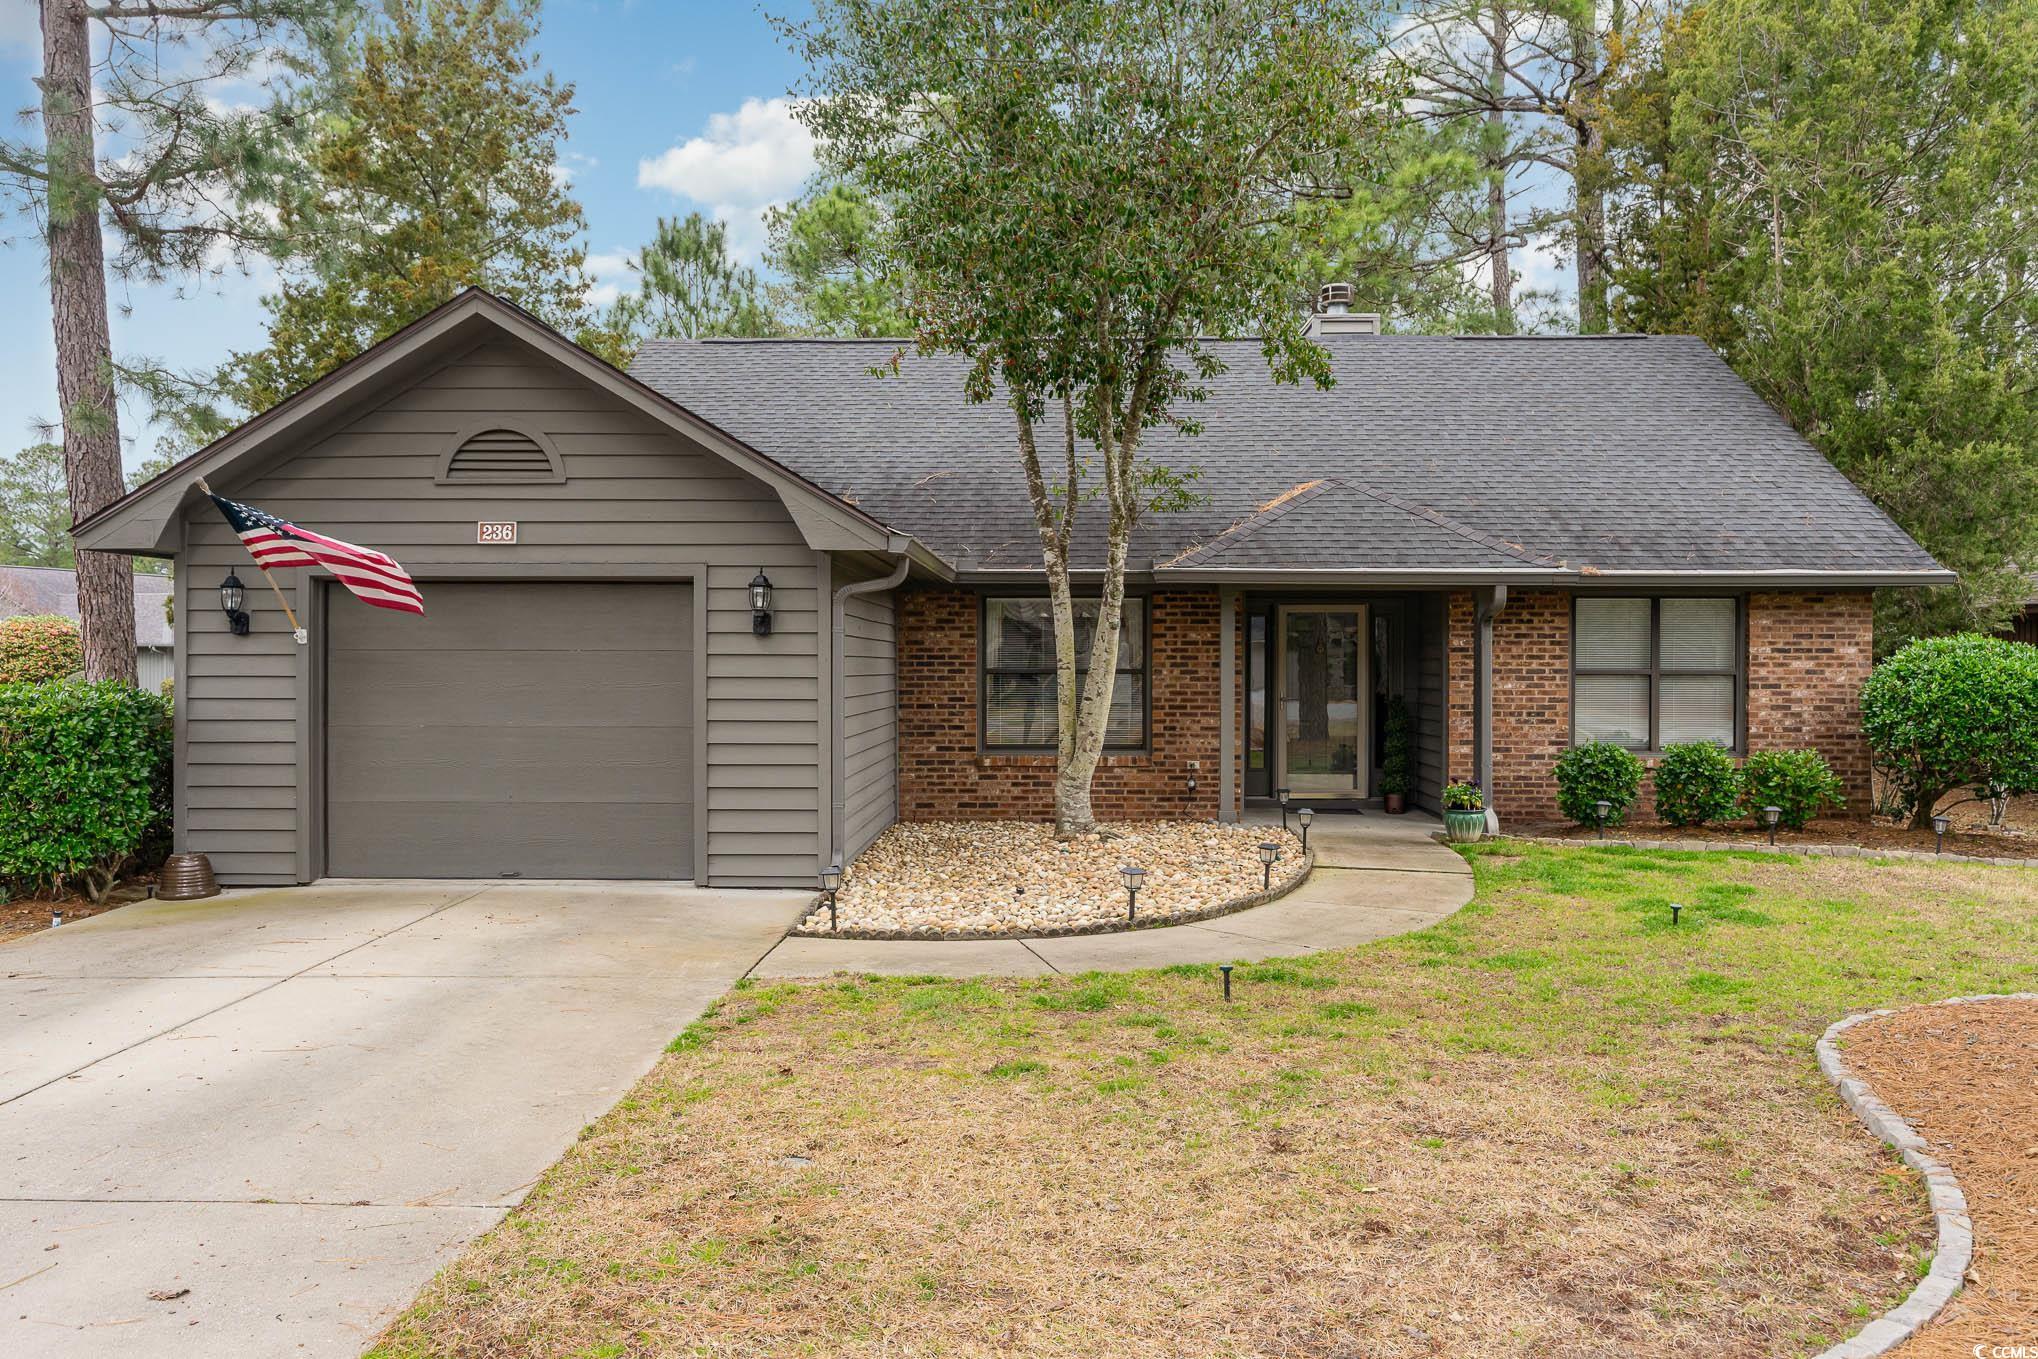 welcome to this beautiful 2 bedroom, 2 full bath, single story home in myrtle trace. this home sits on a corner lot and offers spacious rooms, vaulted ceilings, a carolina room, and is upgraded both inside and out! a new roof was installed in 2019, a new hvac system in 2021, and a new hot water heater in 2021. laminate flooring has been laid throughout most of the home, while tile has been laid in the foyer, hallway, the kitchen and both bathrooms. the foyer, dining room, and family room all share vaulted ceilings, while the family room alone offers a beautiful natural fireplace with a tile outline, transom windows, and two large sliding doors that lead to the back patio. the kitchen has upgraded granite countertops, white appliances, and a large pantry. as you pass through the kitchen, you arrive in the spacious sunroom, which has vaulted ceilings, a ceiling fan, and plenty of windows that allow natural light to fill the room. both bedrooms are located on the opposite side of the house. the master bedroom offers a ceiling fan and a large bathroom that has a separate tub and shower, which has a glass shower door. the back patio is located right off the family room and with the trees providing the perfect amount of shade, it will be one of your favorite spots to enjoy the carolina weather. the garage offers pull down attic stairs which lead to the spacious attic that is perfect for storage. the owners have also added an irrigation system and gutter guards. this home has been well taken care of, comes with plenty of upgrades and new additions, and its thoughtful design and functionality will make it a perfect fit for its new owners. myrtle trace is a 55+ community and has a very active lifestyle for its residents, including the community golf course "burning ridge". all measurements/information are estimates and not guaranteed. it's the responsibility of the buyer to verify any and all information.